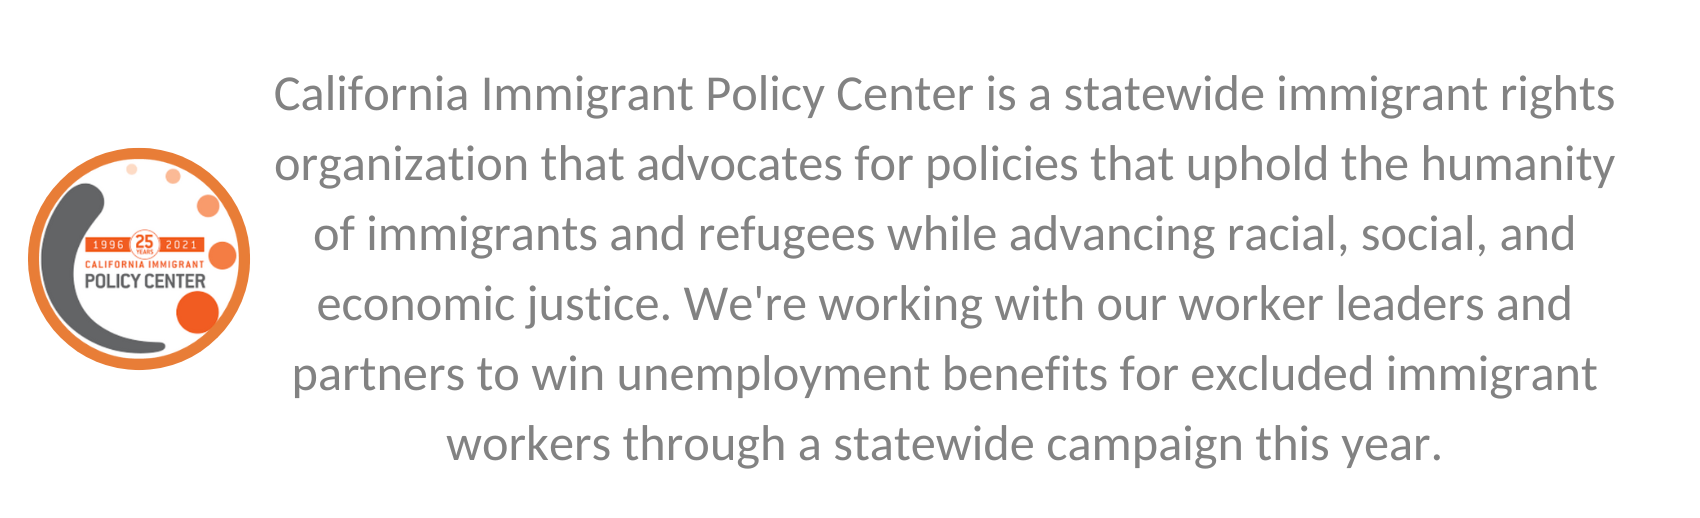 A quote from Irvine grantee California Immigrant Policy Center that says, "California Immigrant Policy Center is a statewide immigrant rights organization that advocates for policies that uphold the humanity of immigrants and refugees while advancing racial, social, and economic justice. We're working with our worker leaders and partners to win unemployment benefits for excluded immigrant workers through a statewide campaign this year."